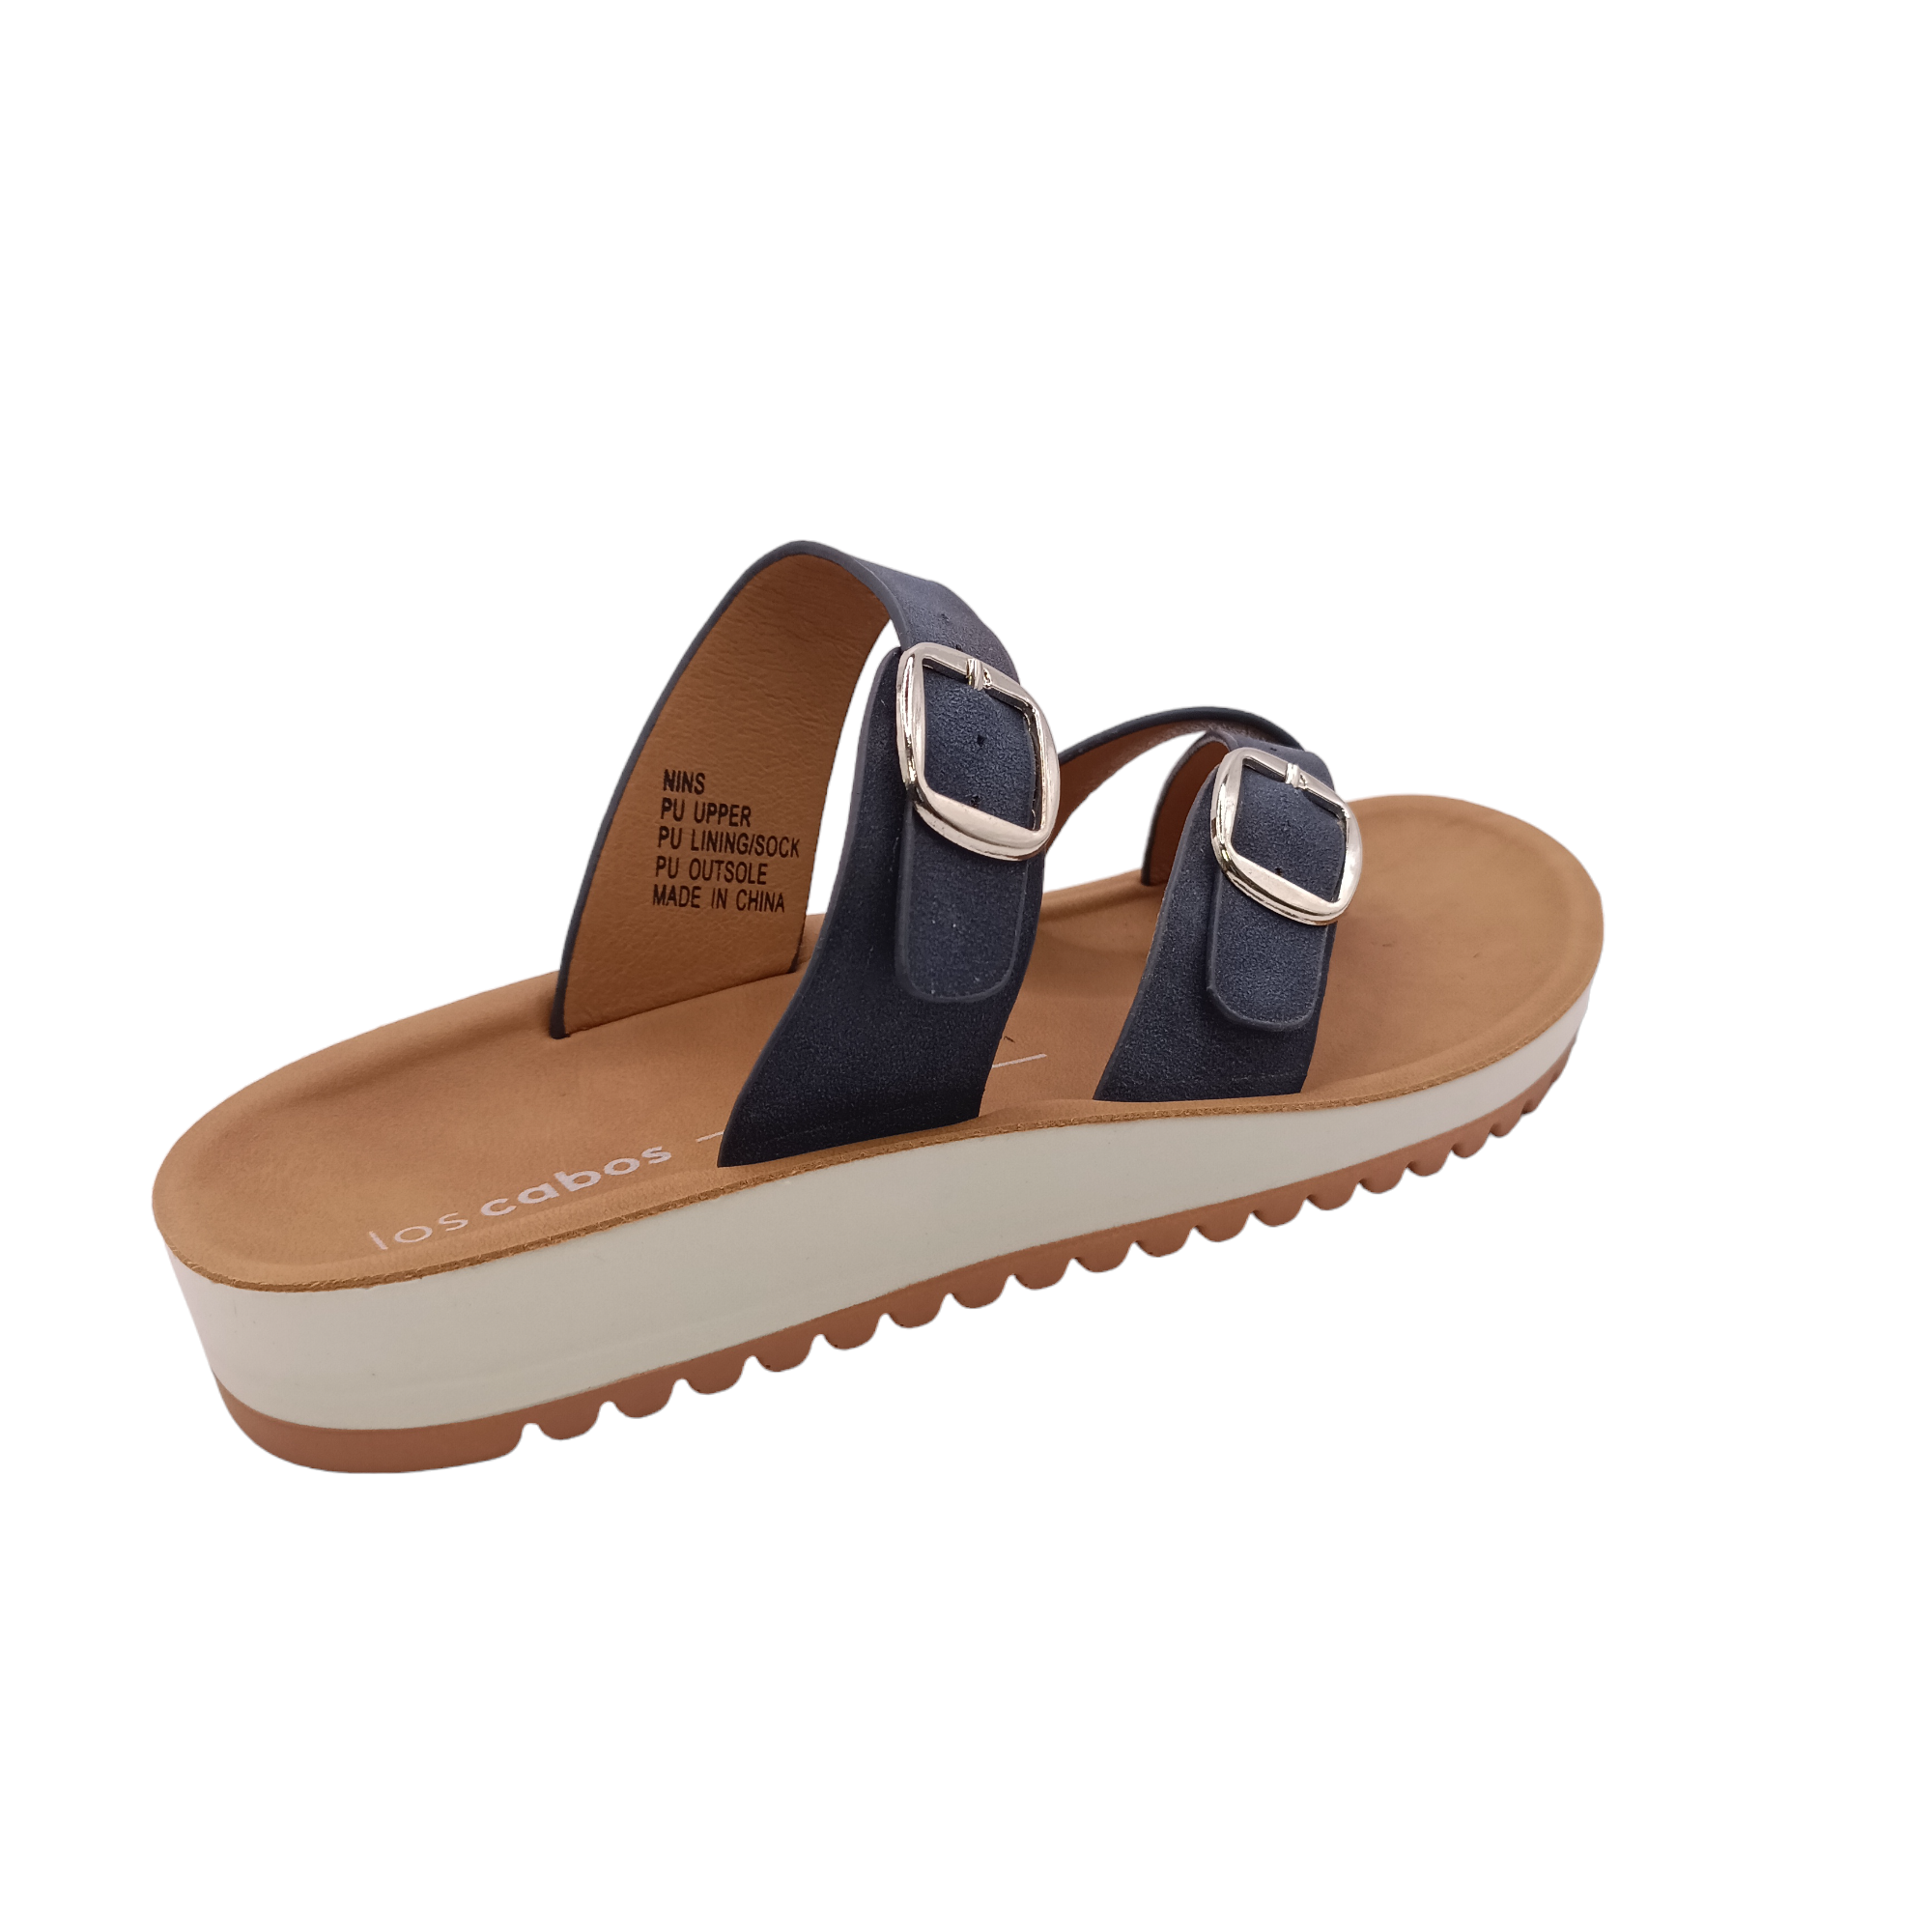 Nins - shoe&amp;me - Los Cabos - Jandal - Jandals, Summer, Womens